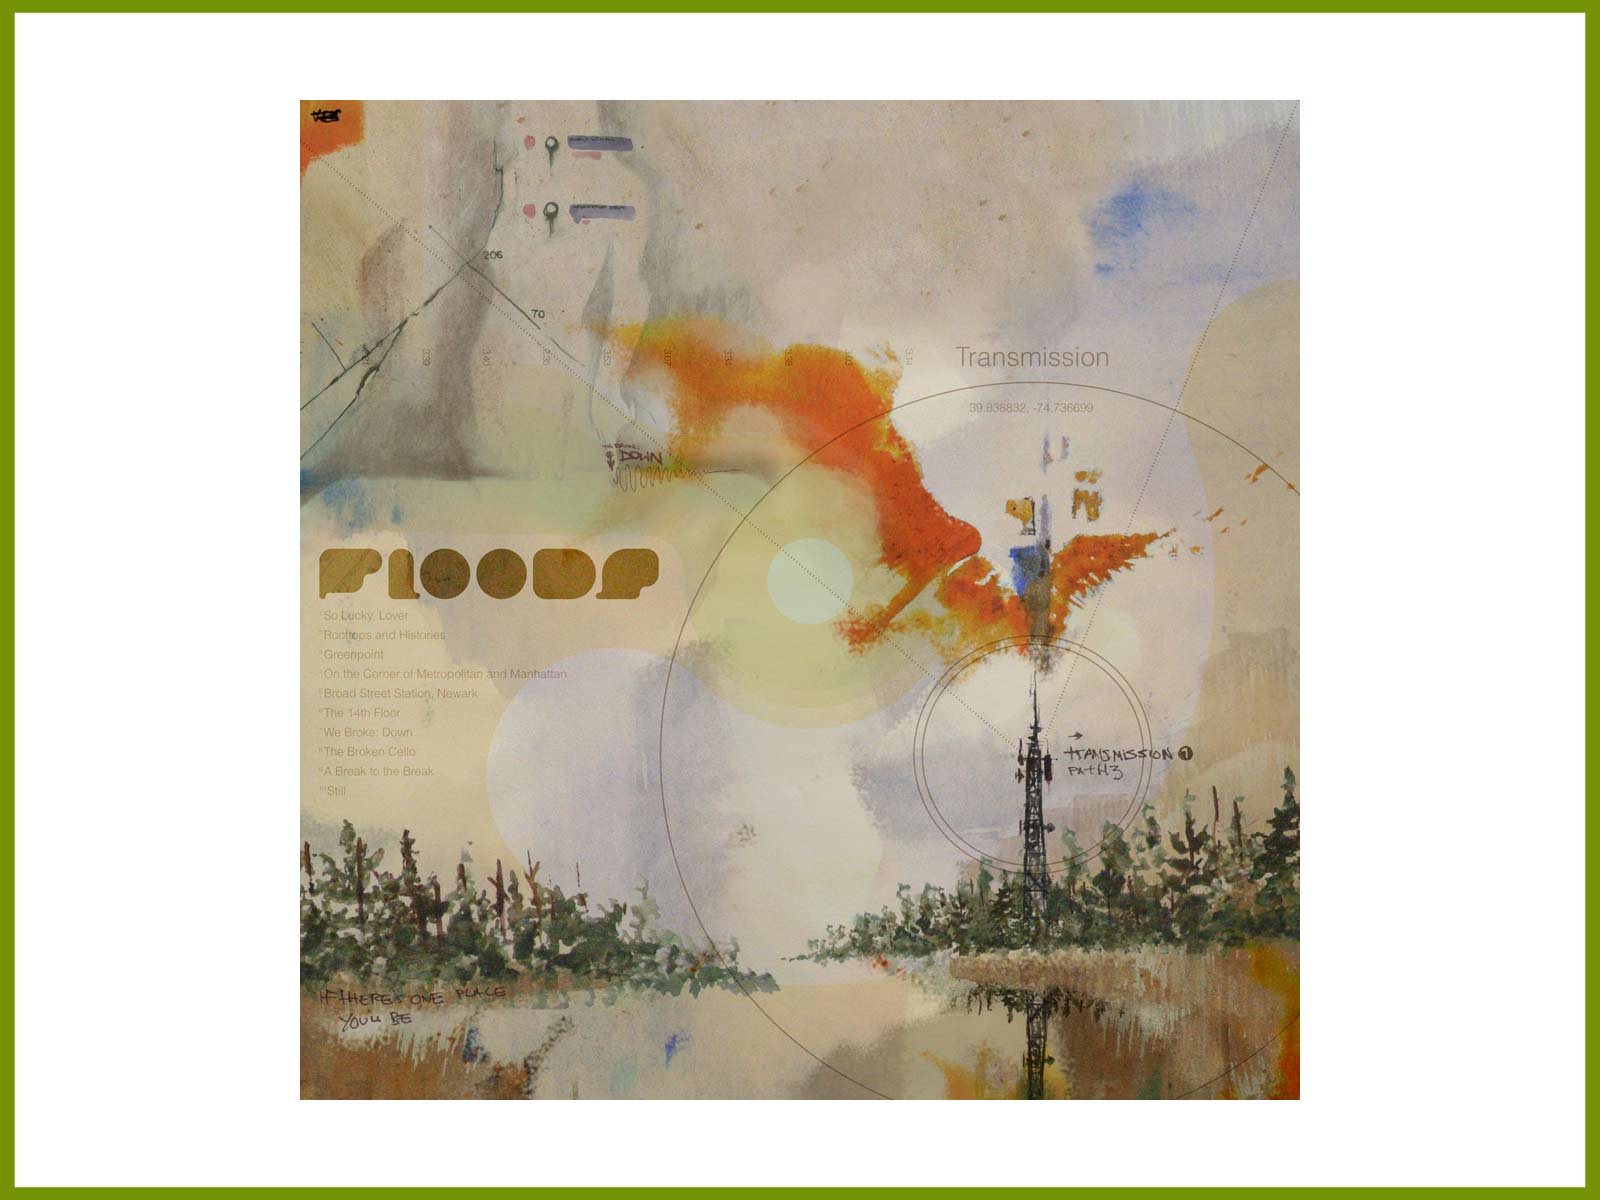 Get new album “Transmission” by Floods from 08/08/08